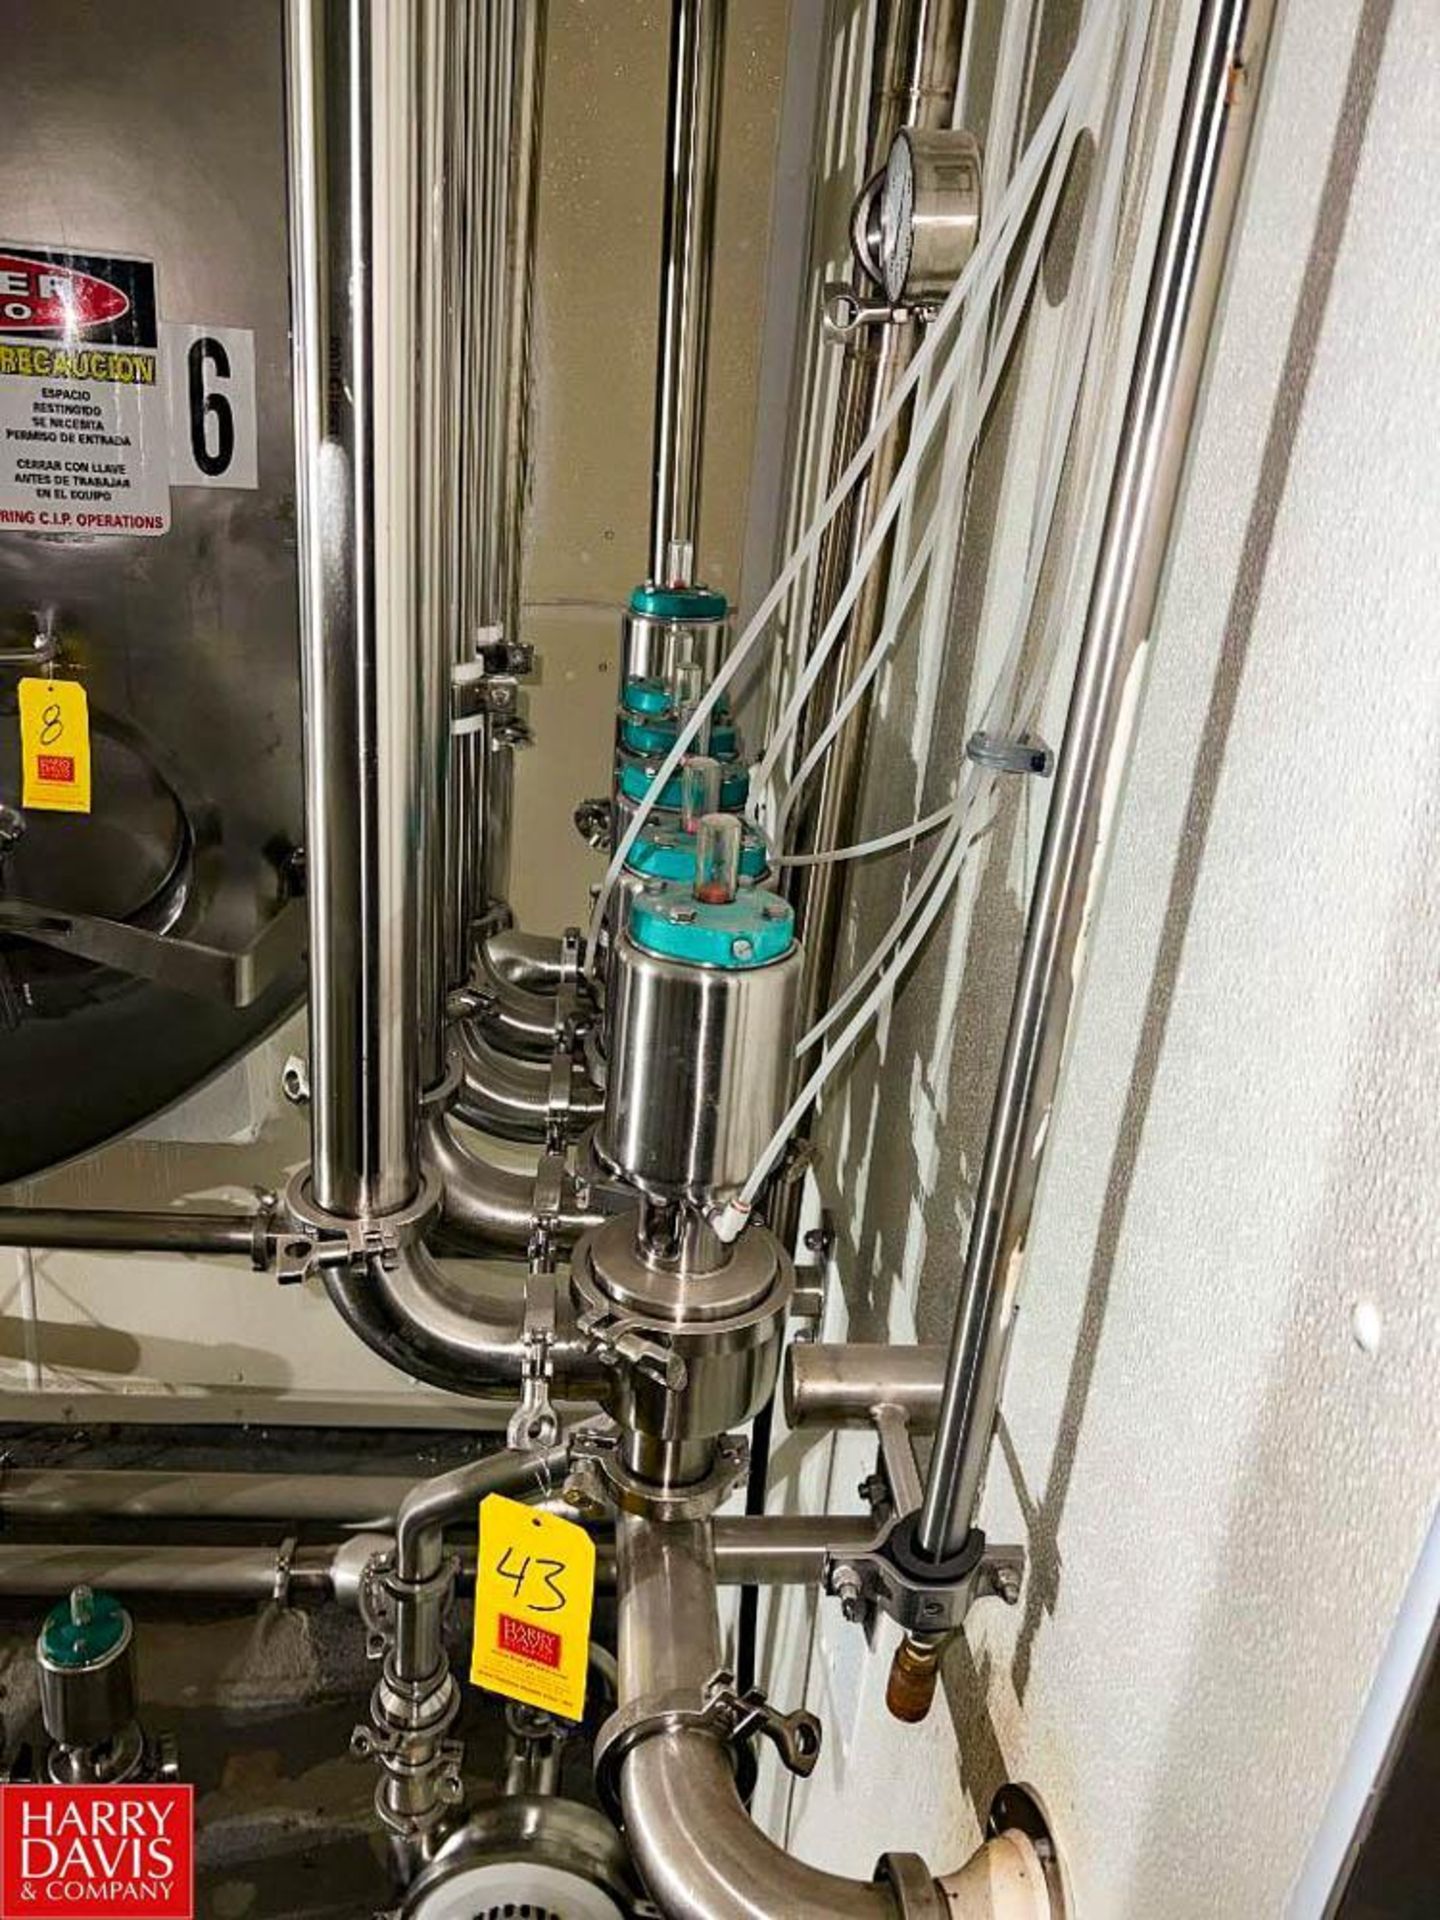 Tri-Clover 3-Way 2.5" S/S Air Valves in Manifold (Location: Neosho, MO) - Rigging: $50 - Image 2 of 2